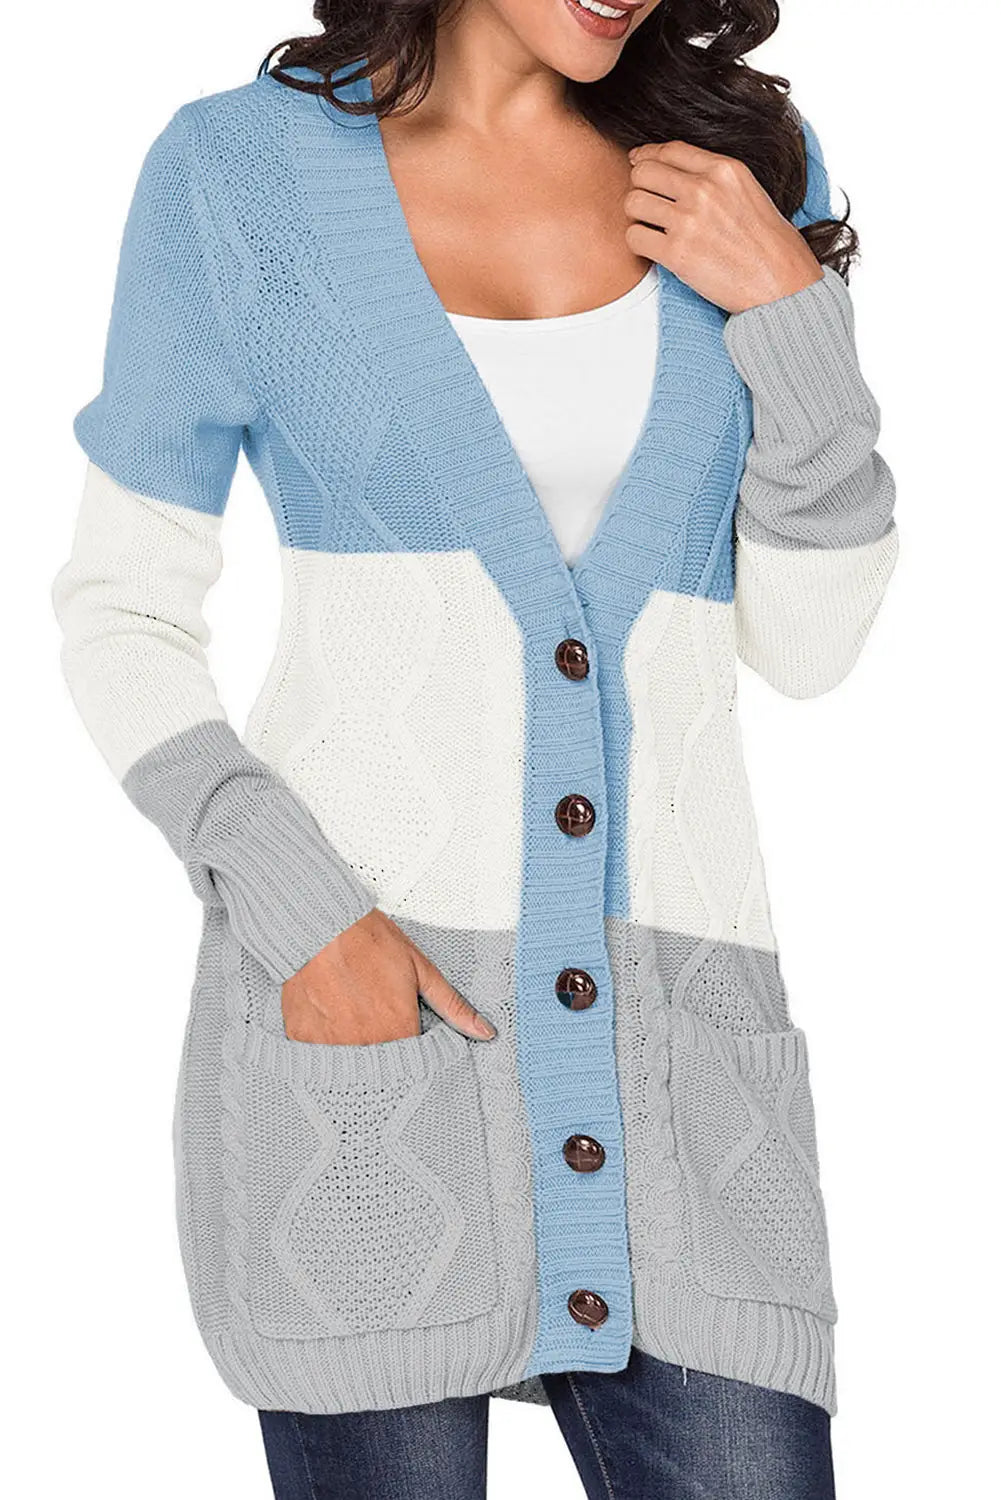 Blue front pocket and buttons closure cardigan - sweaters & cardigans